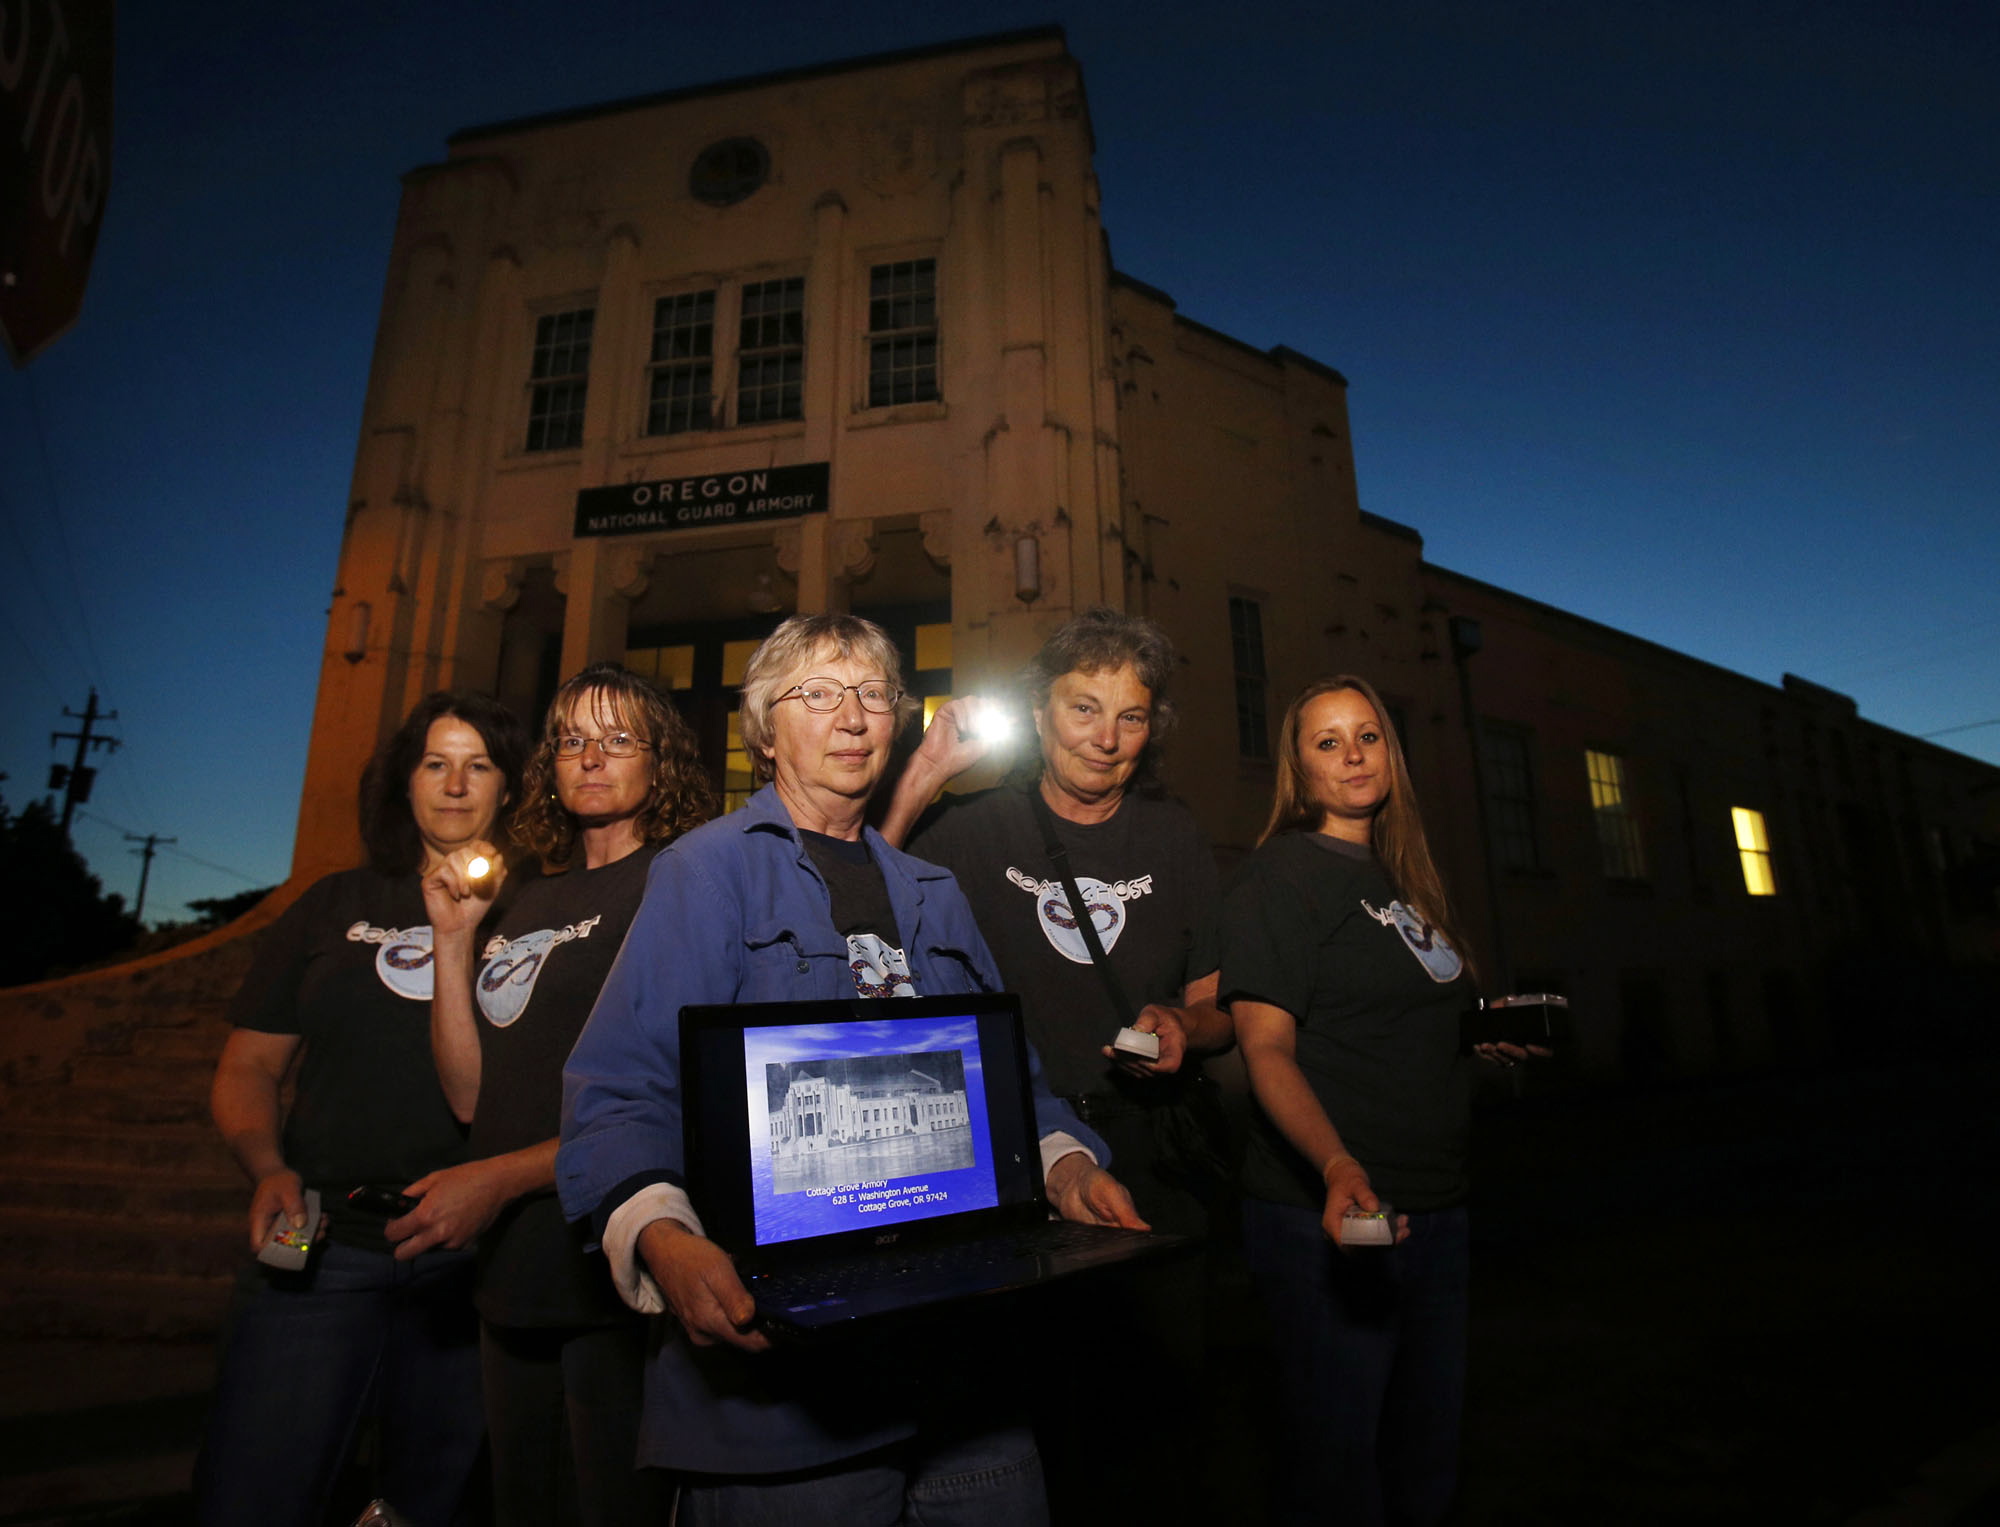 Members of the Coast Ghost Paranormal Research Society including Lisa Hutchinson (left), Christie Best, Denise Cacace, Ann Fillmore and Tiffany Cloud gather at the National Guard Armory in Cottage Grove on June 13 to search for spirits, mostly with military ties, that they claim occupy the 82-year-old building.